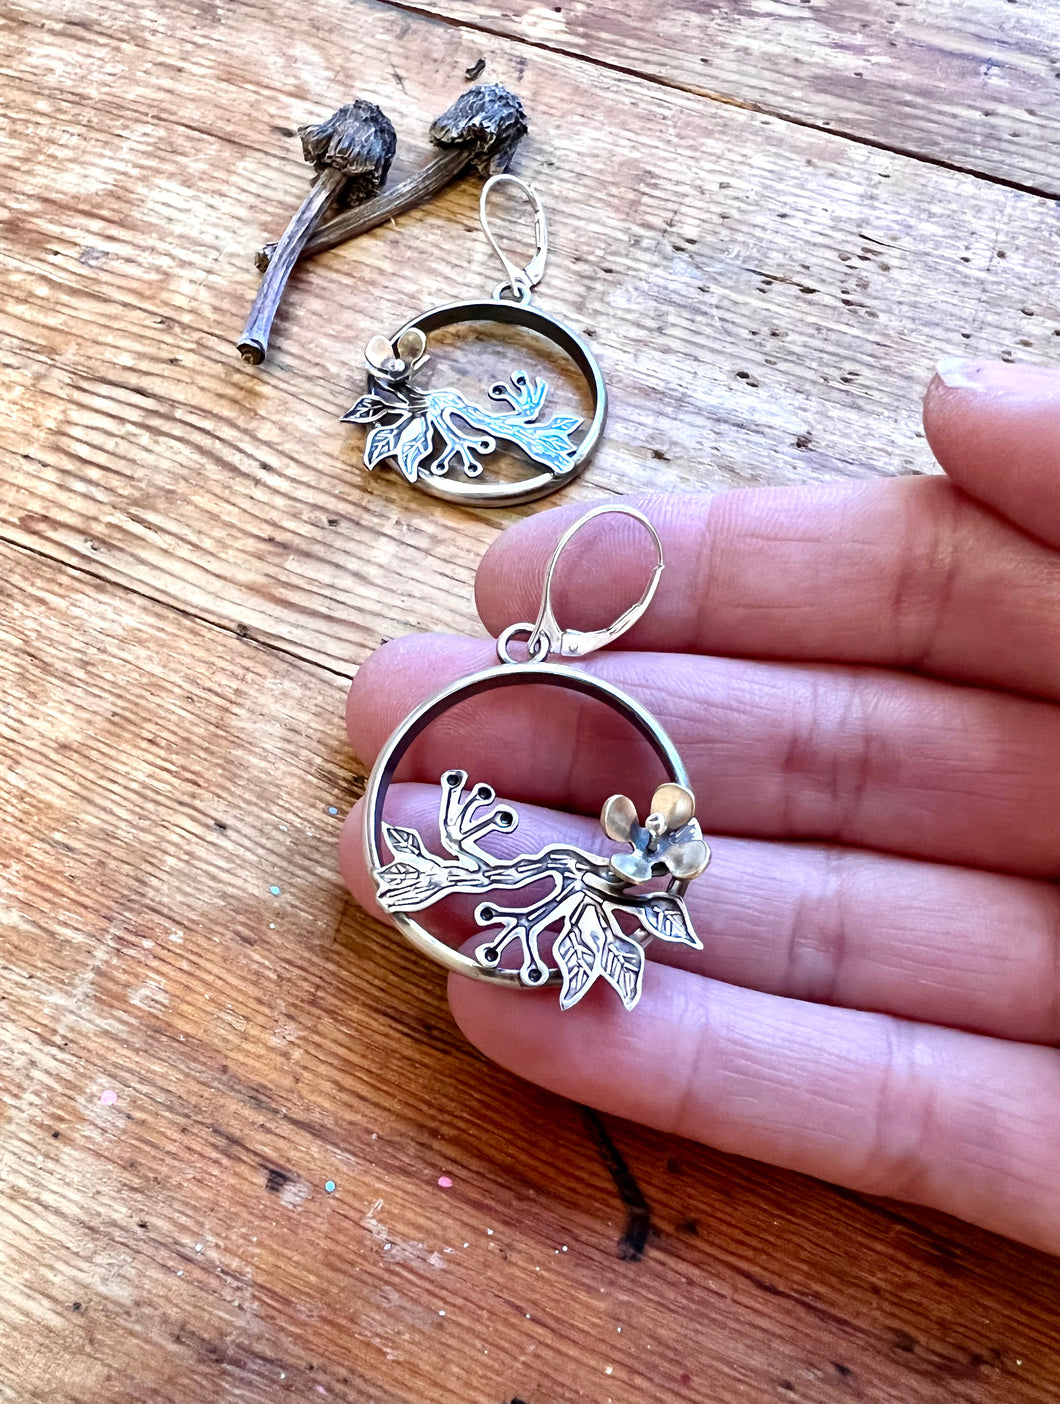 Sterling silver earrings with handmade stamped design